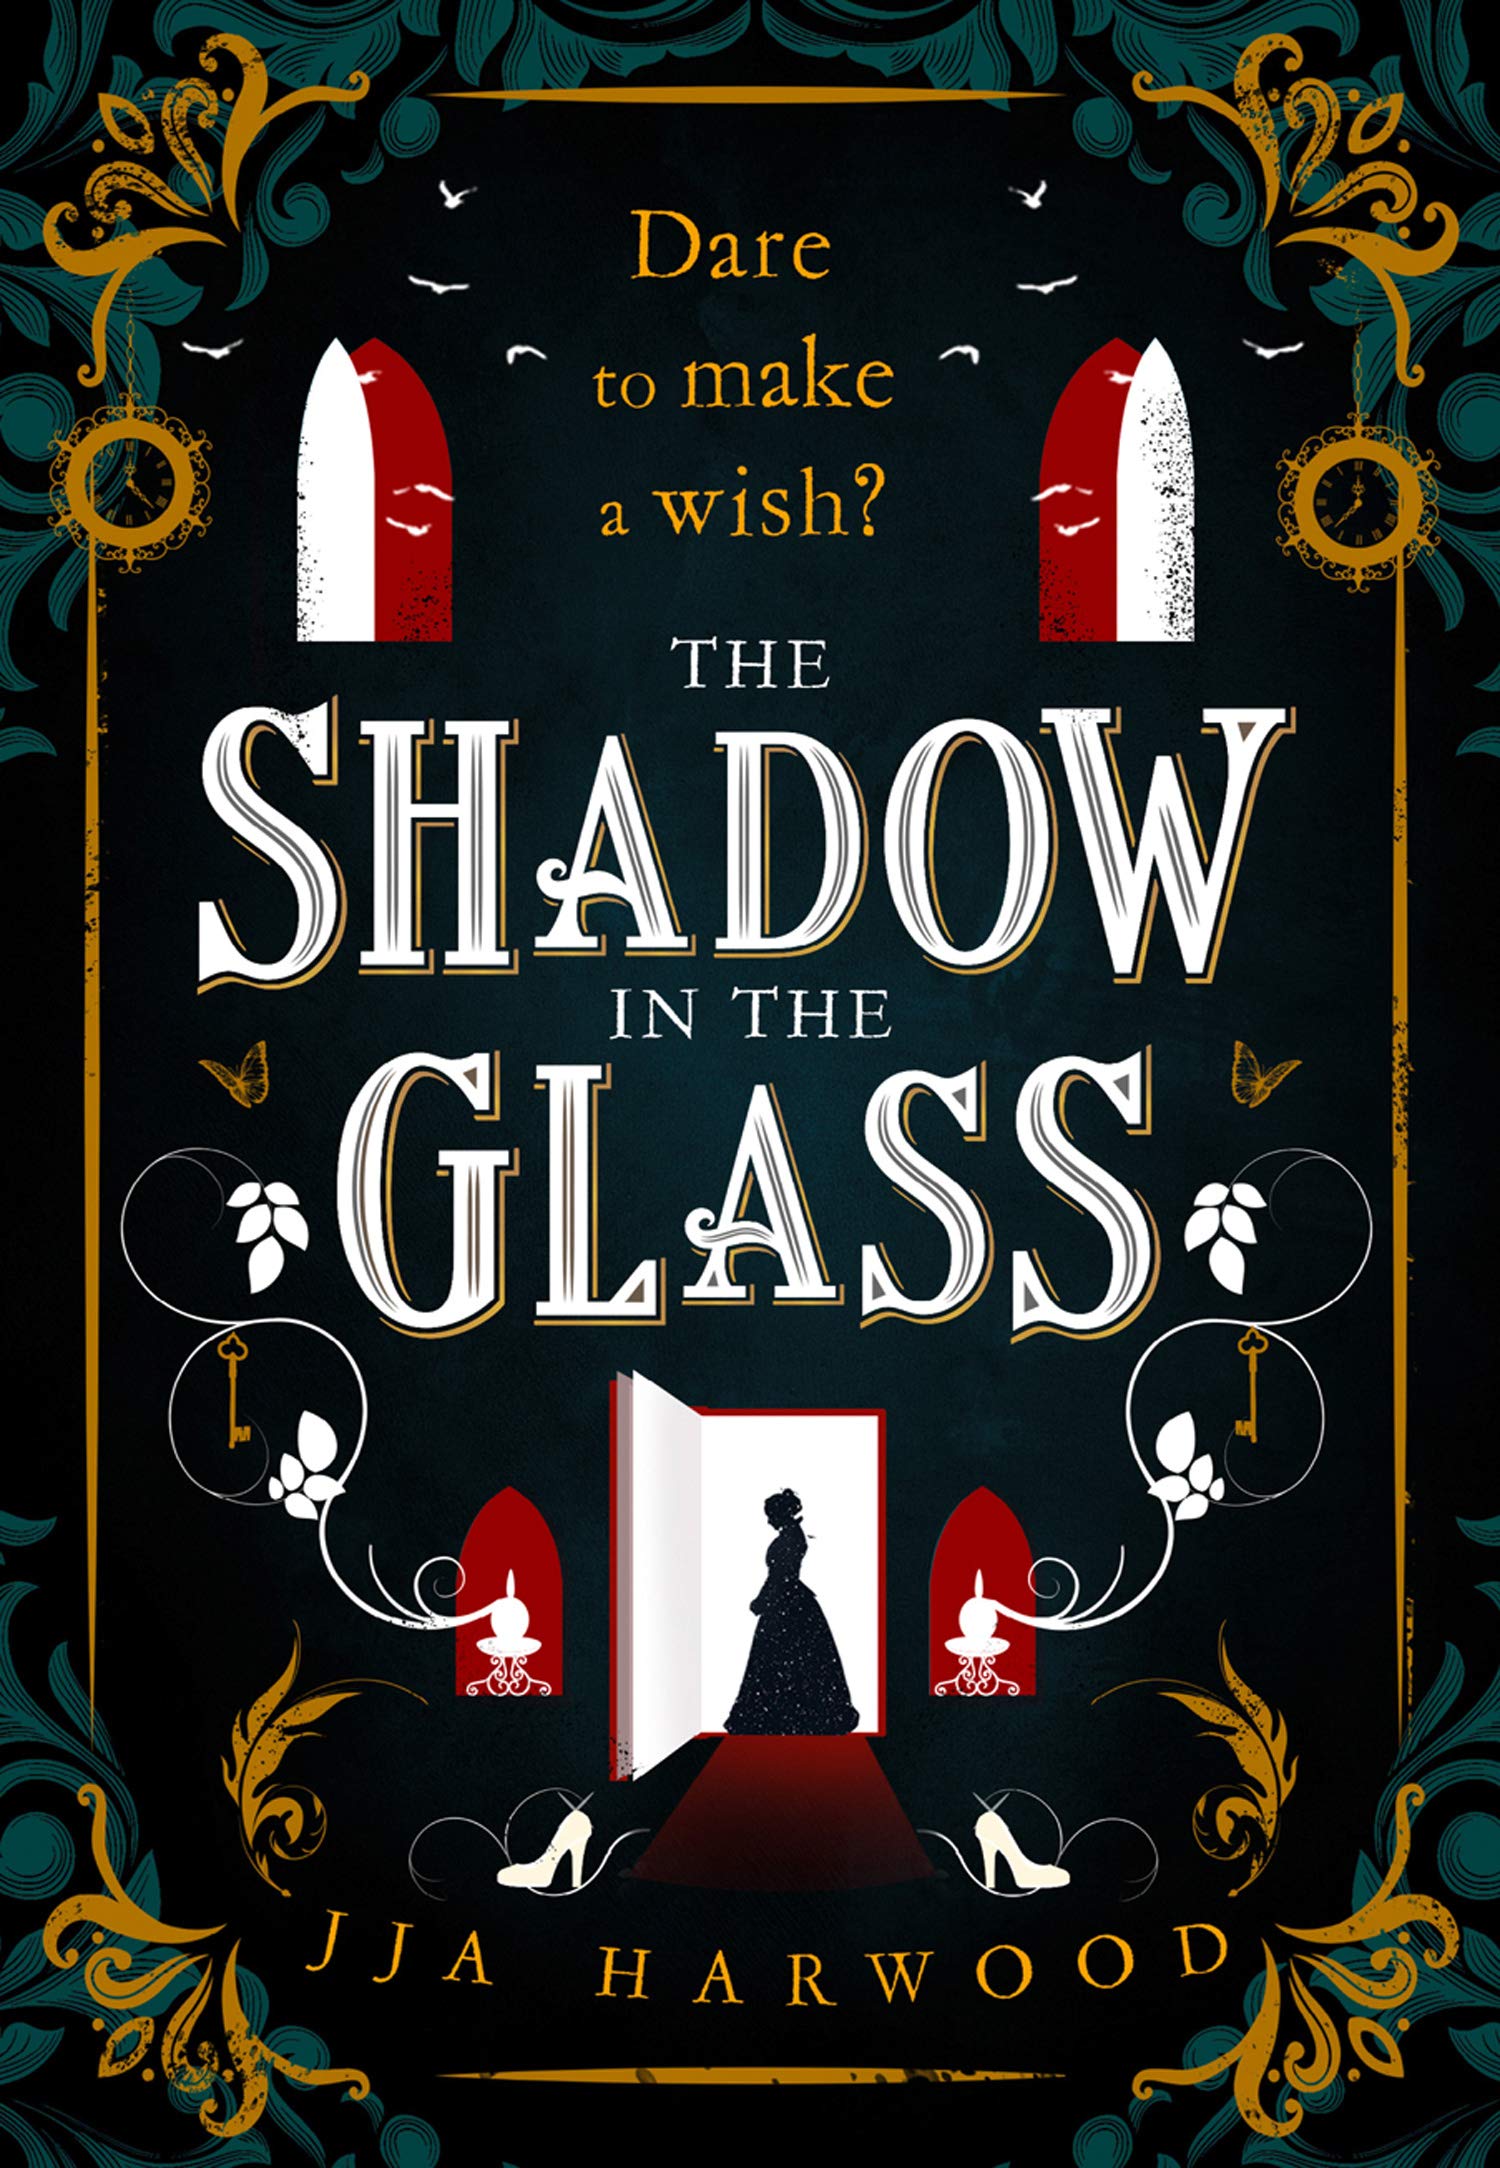 The Shadow in the Glass by J. J. A. Harwood